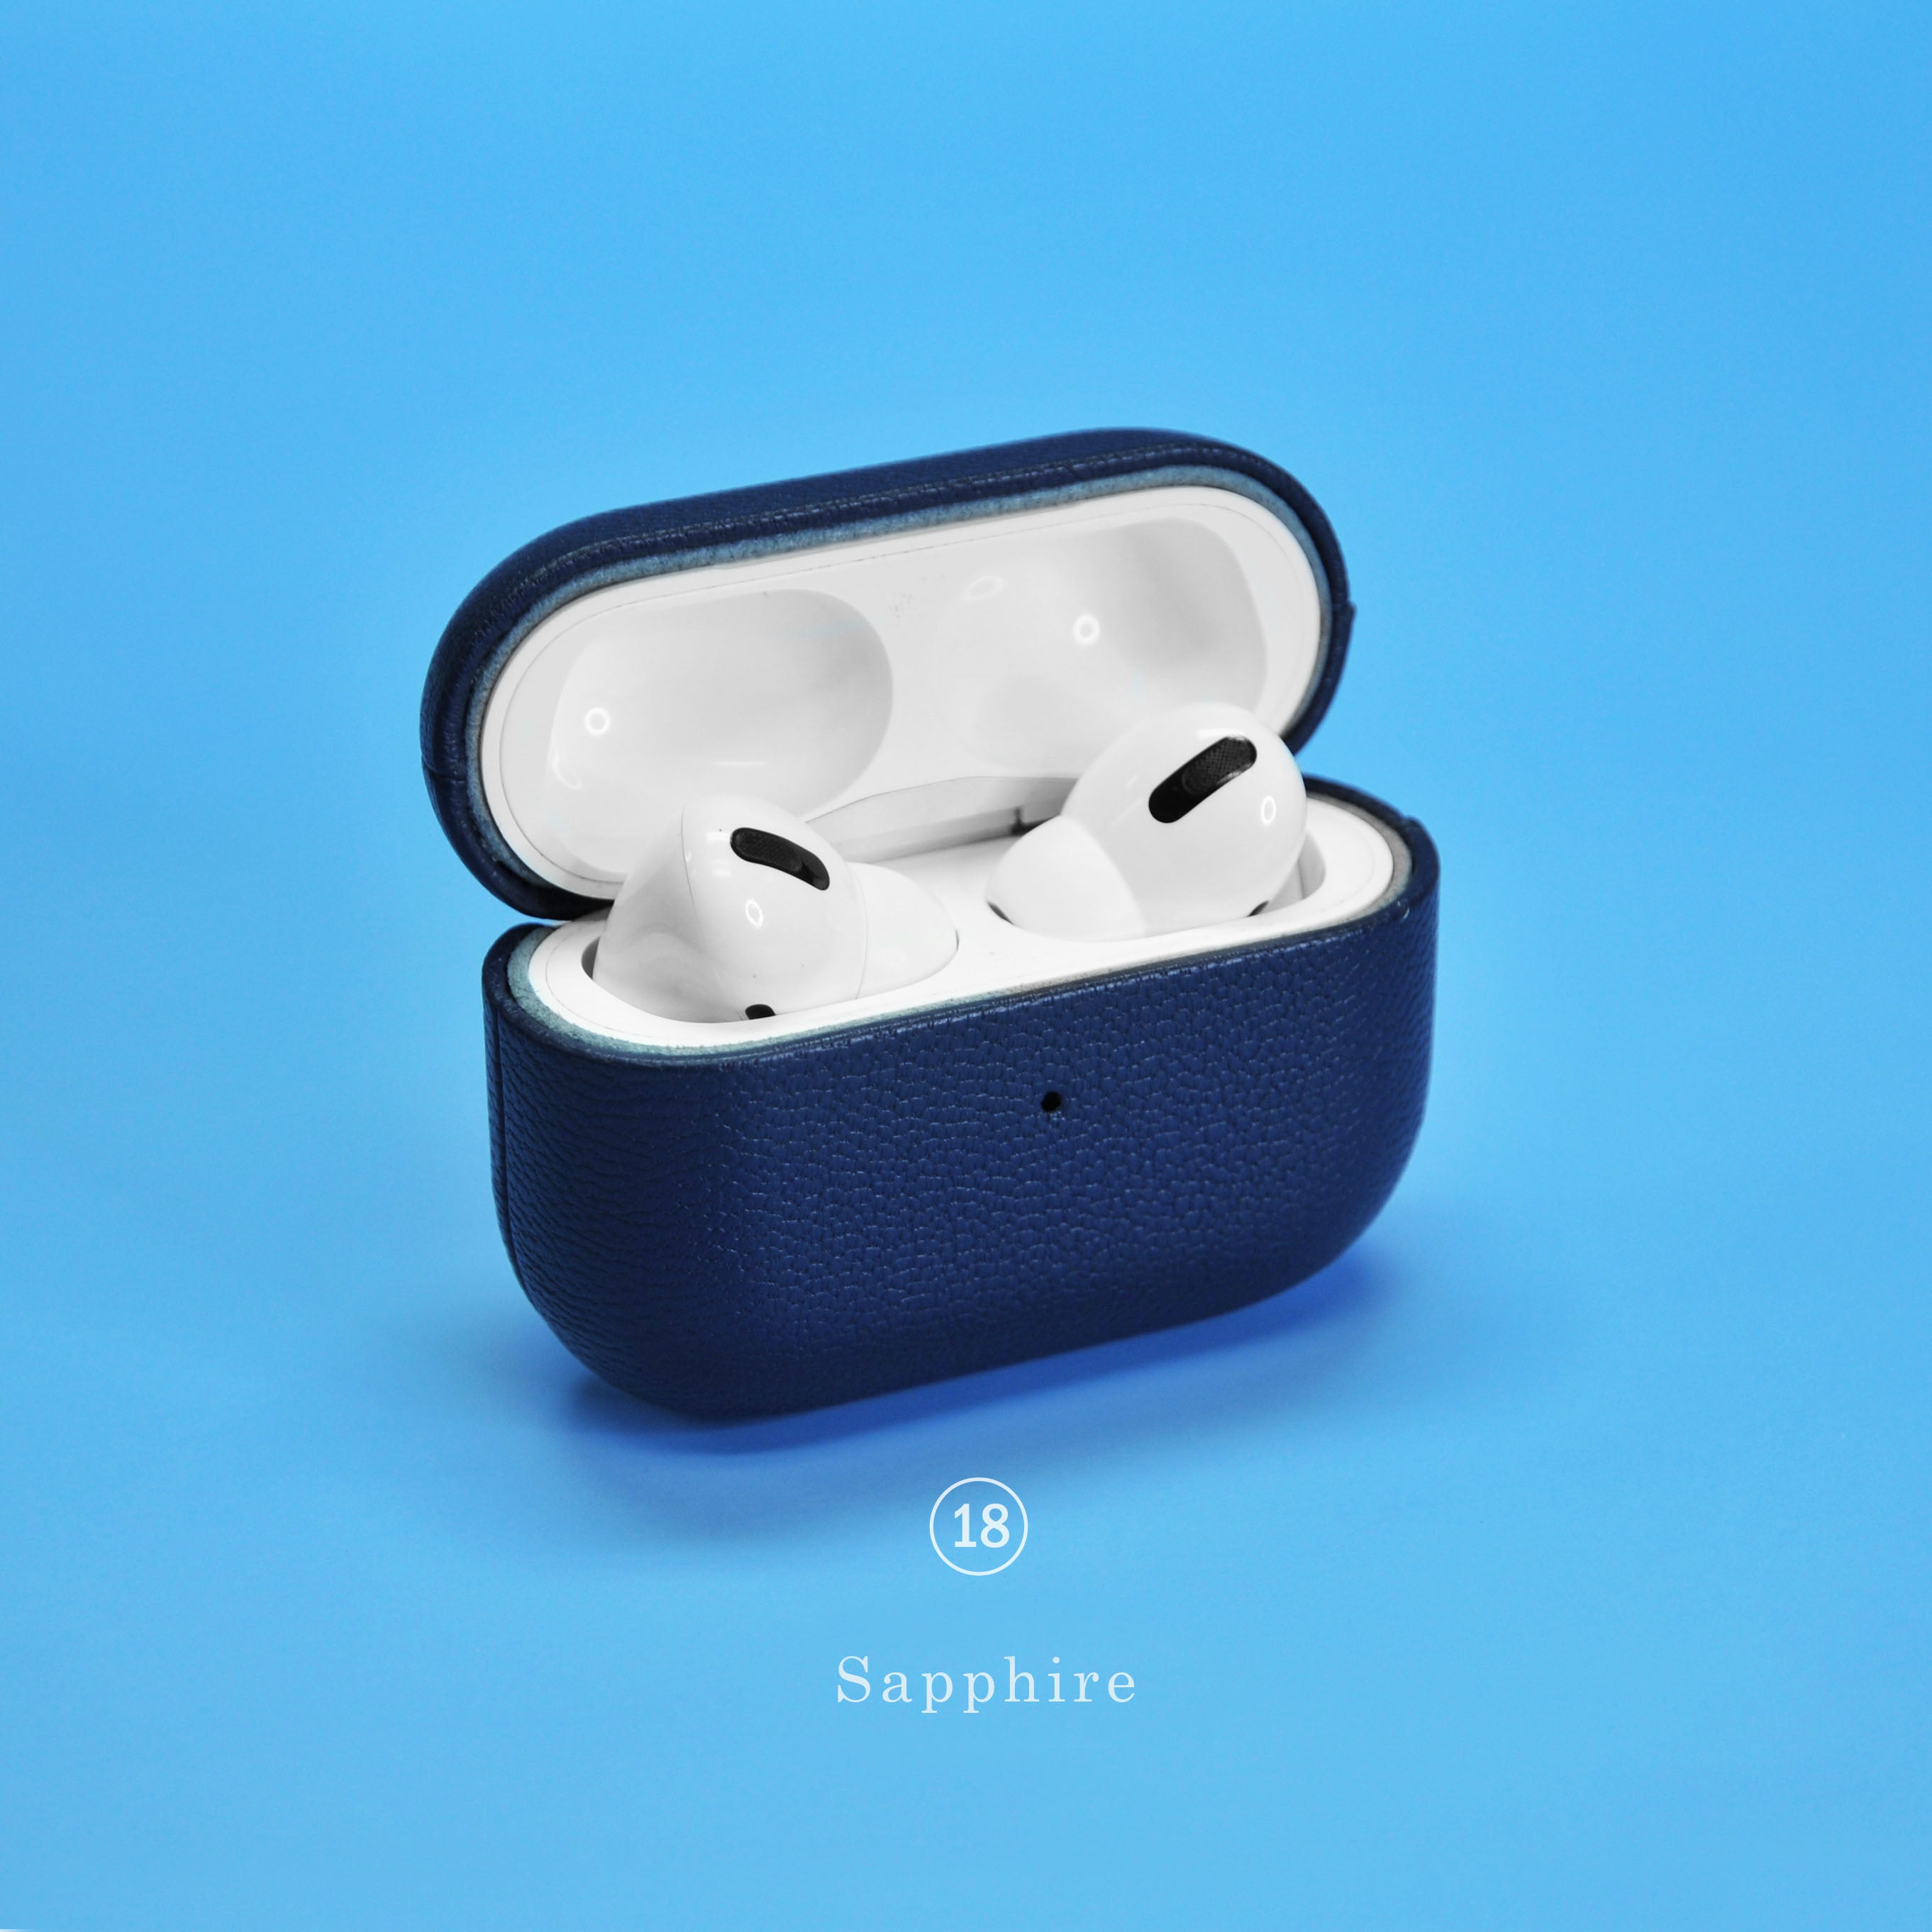 Sapphire Leather AirPod Case